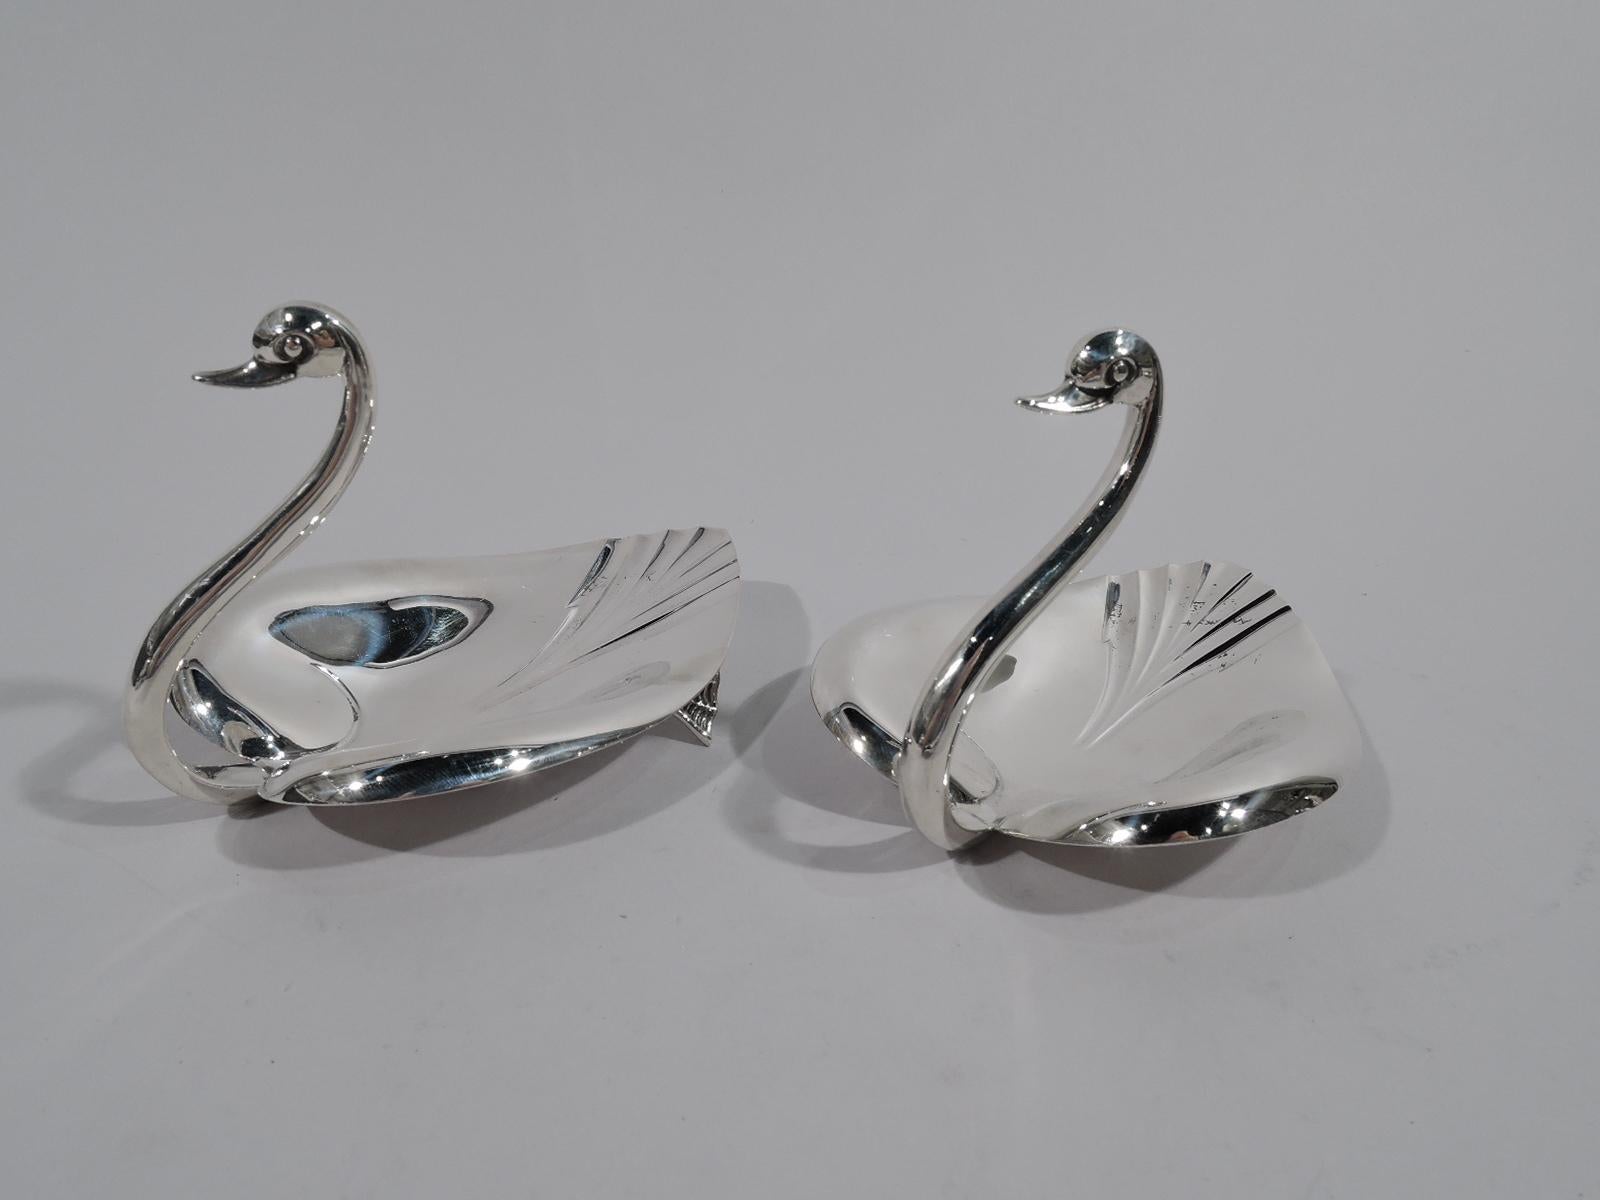 Pair of Mid-Century Modern sterling silver bowls. Made by Tiffany & Co. in New York. Each: Semi-abstract swan with lifted heart-shaped bowl with chased volute scrolls and fluted tale. S-scroll neck terminating in head with bead eyes and bill. Rests